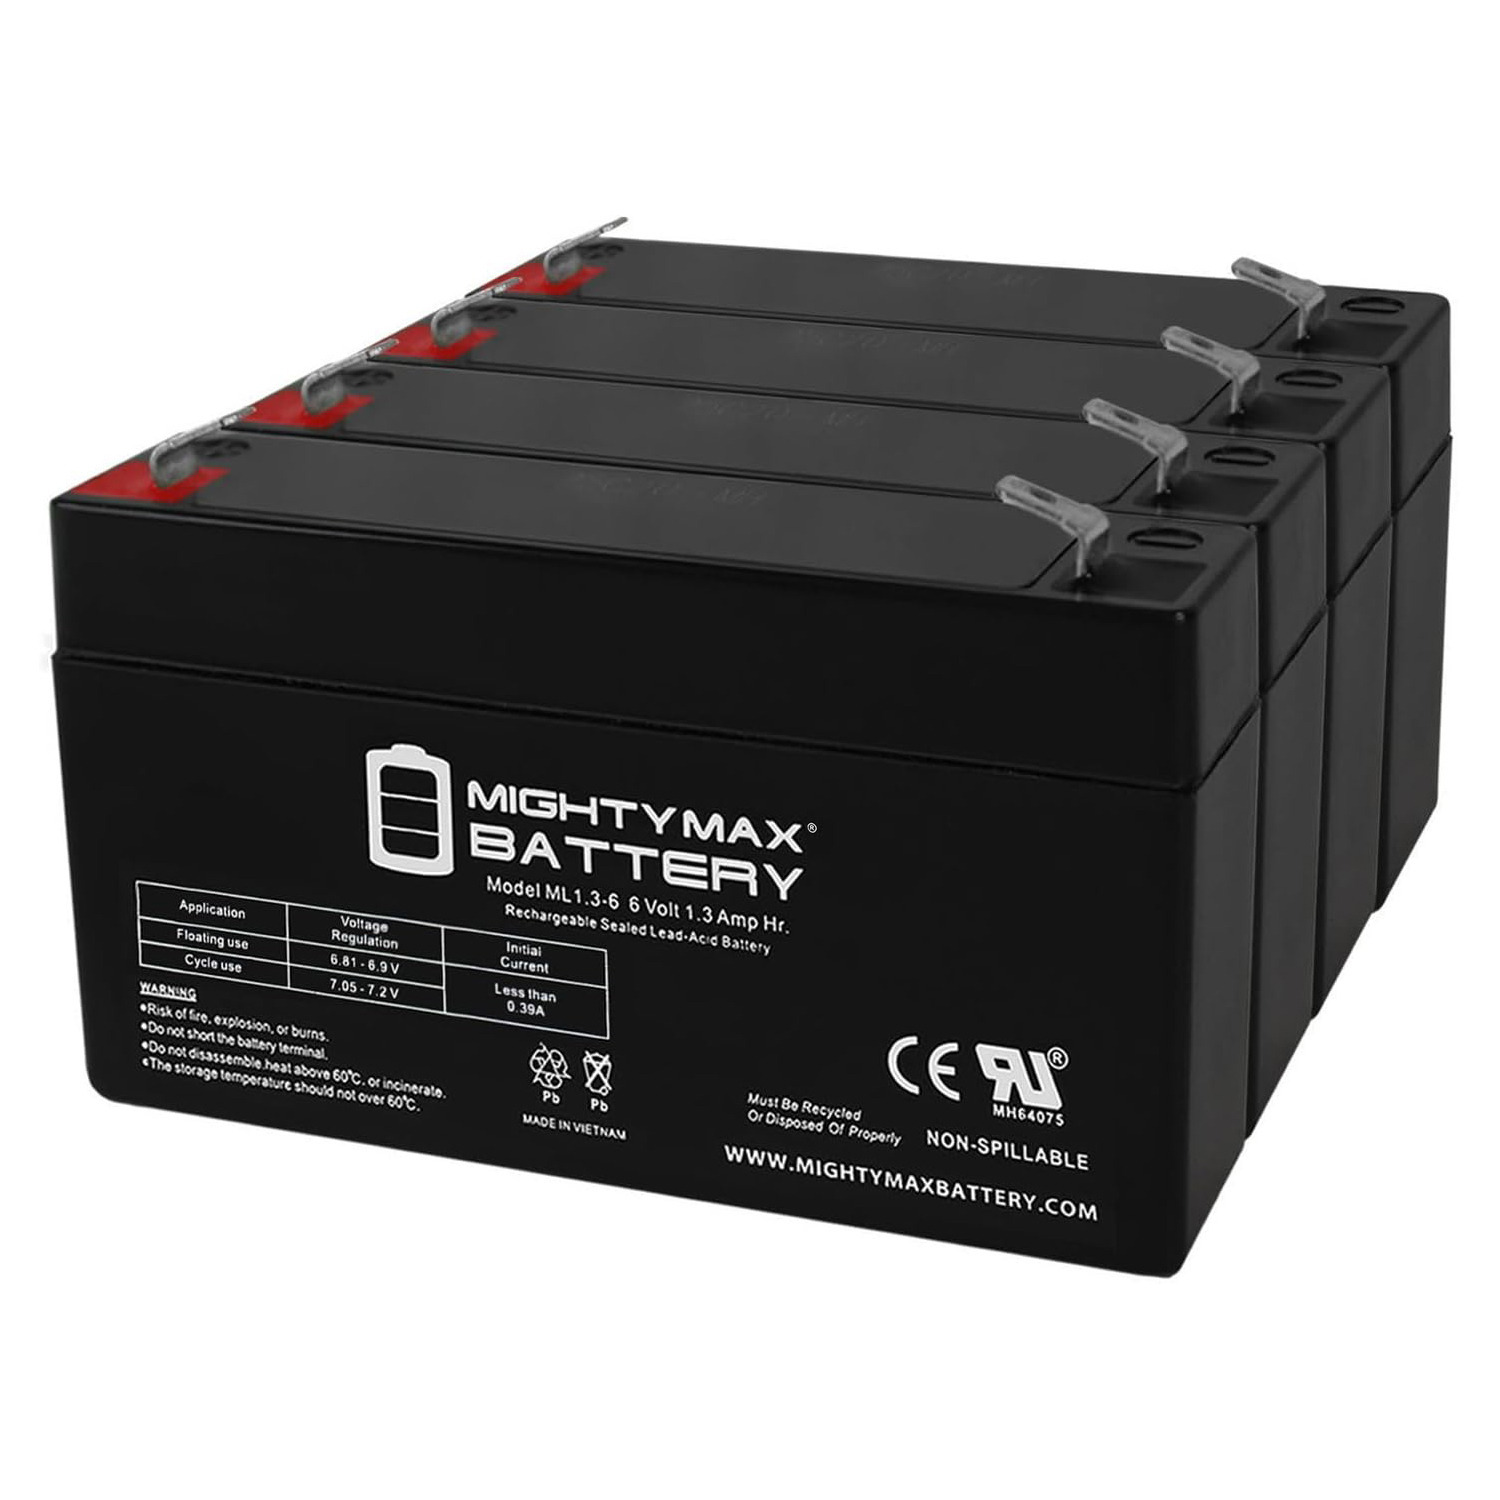 6V 1.3Ah SLA Replacement Battery for Exell FP613 - 4 Pack